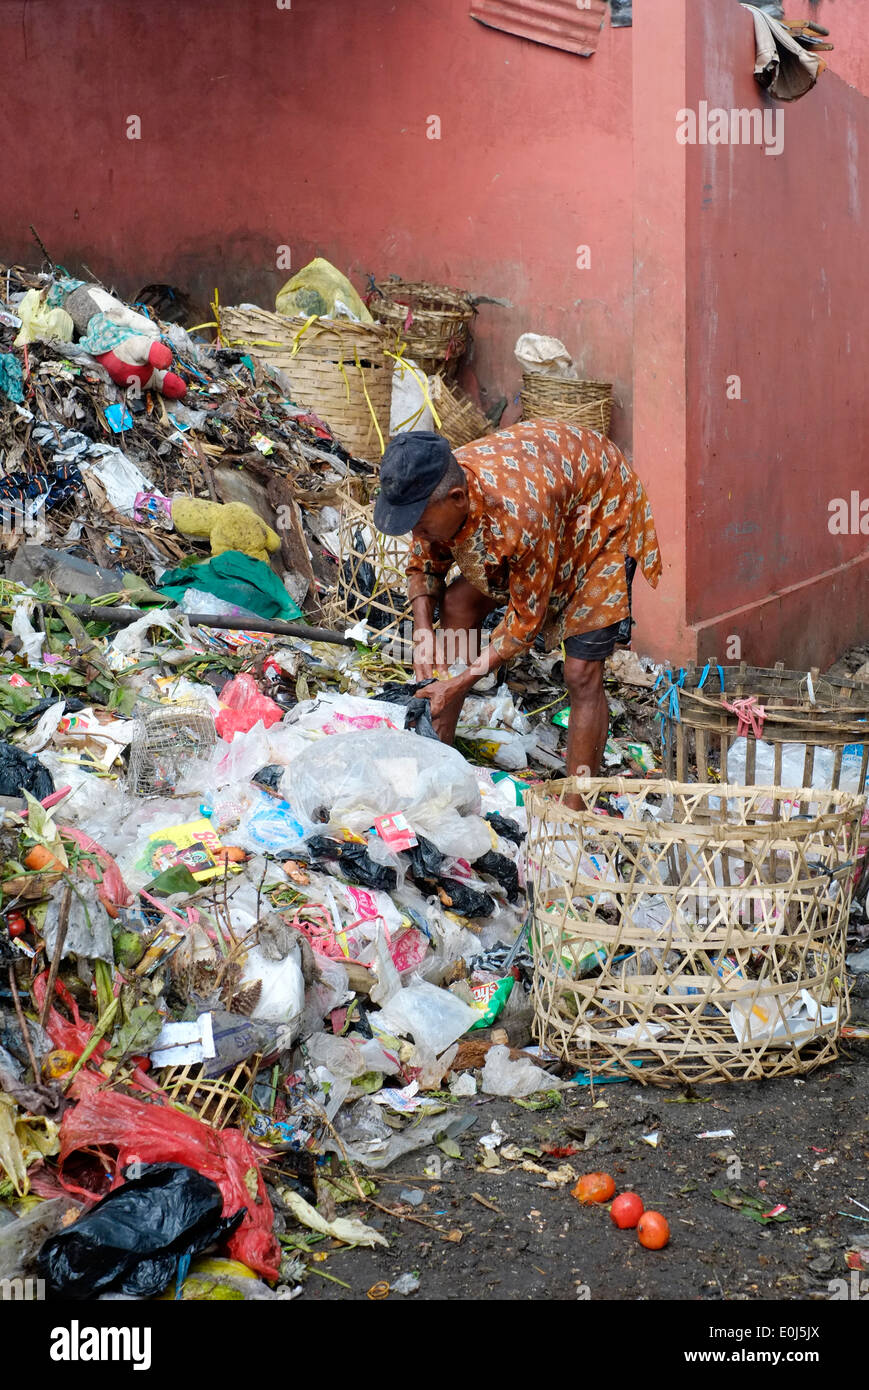 local man working on pile of fetid rubbish at a public dump in malang indonesia Stock Photo